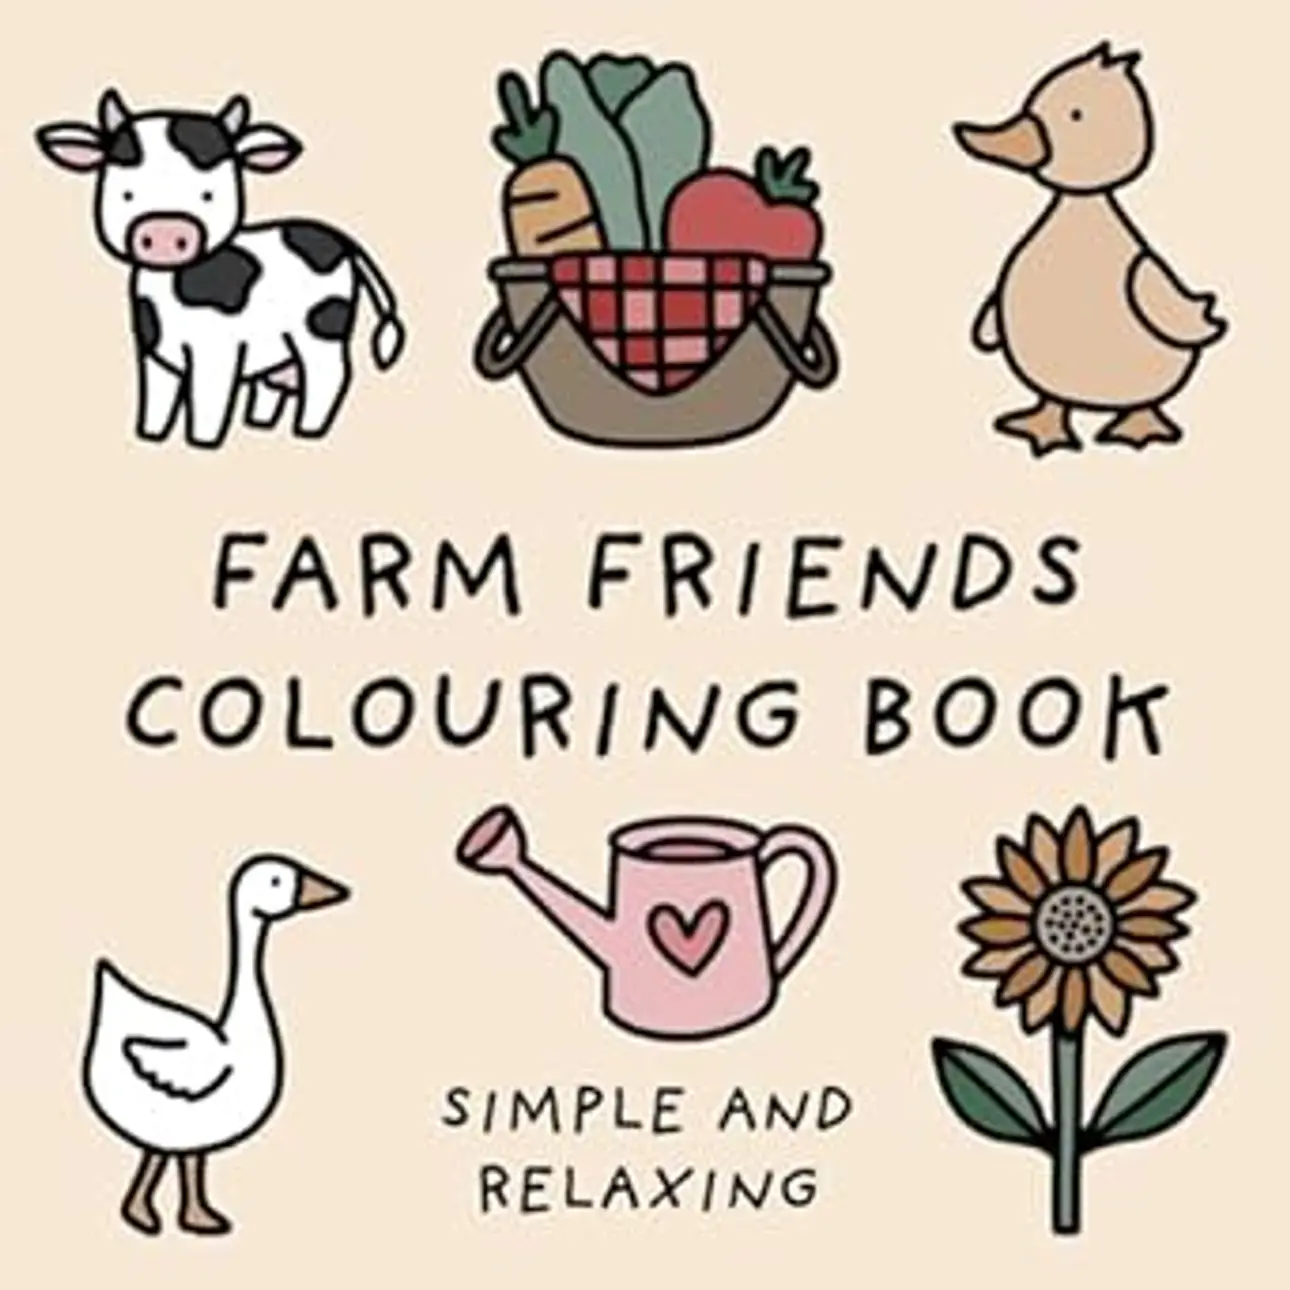 Farm Friends Colouring Book (Simple and Relaxing Bold Designs for Adults & Children) (Simple and Relaxing Colouring Books) : Design Studio, Mary Hart, Hart, Mary: Amazon.de: Bücher